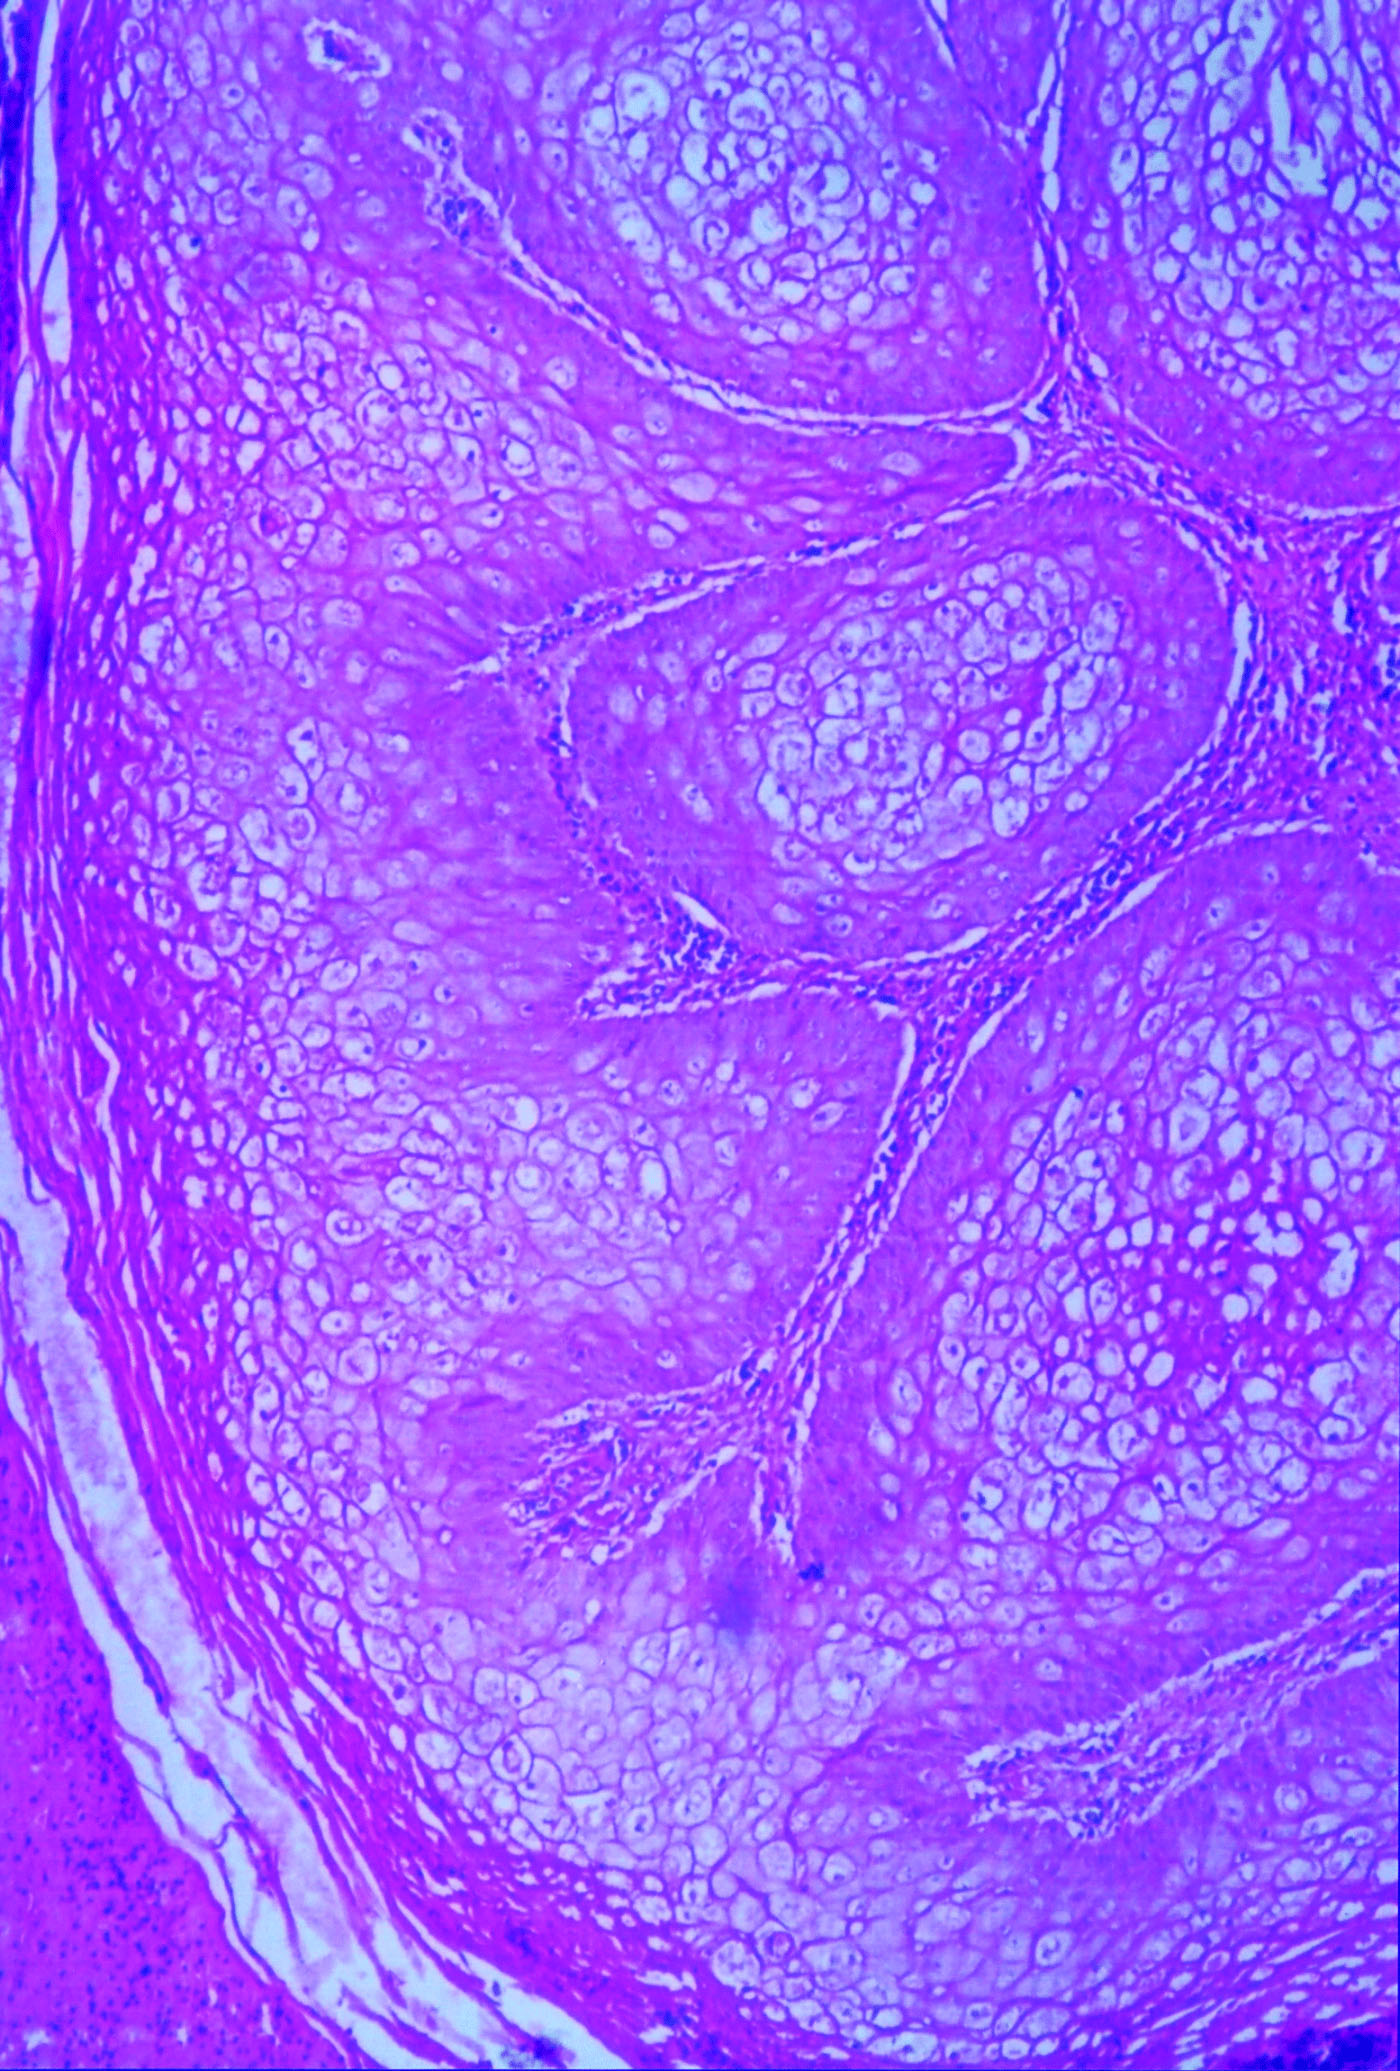 Figure 4.  Intact keratinized surface, excessive proliferation of fibrous connective tissue, lobular pattern and infiltration of heterophils and macrophages in peafowl chick suffering from avian pox. Haematoxylin and eosin. Magnification x40.